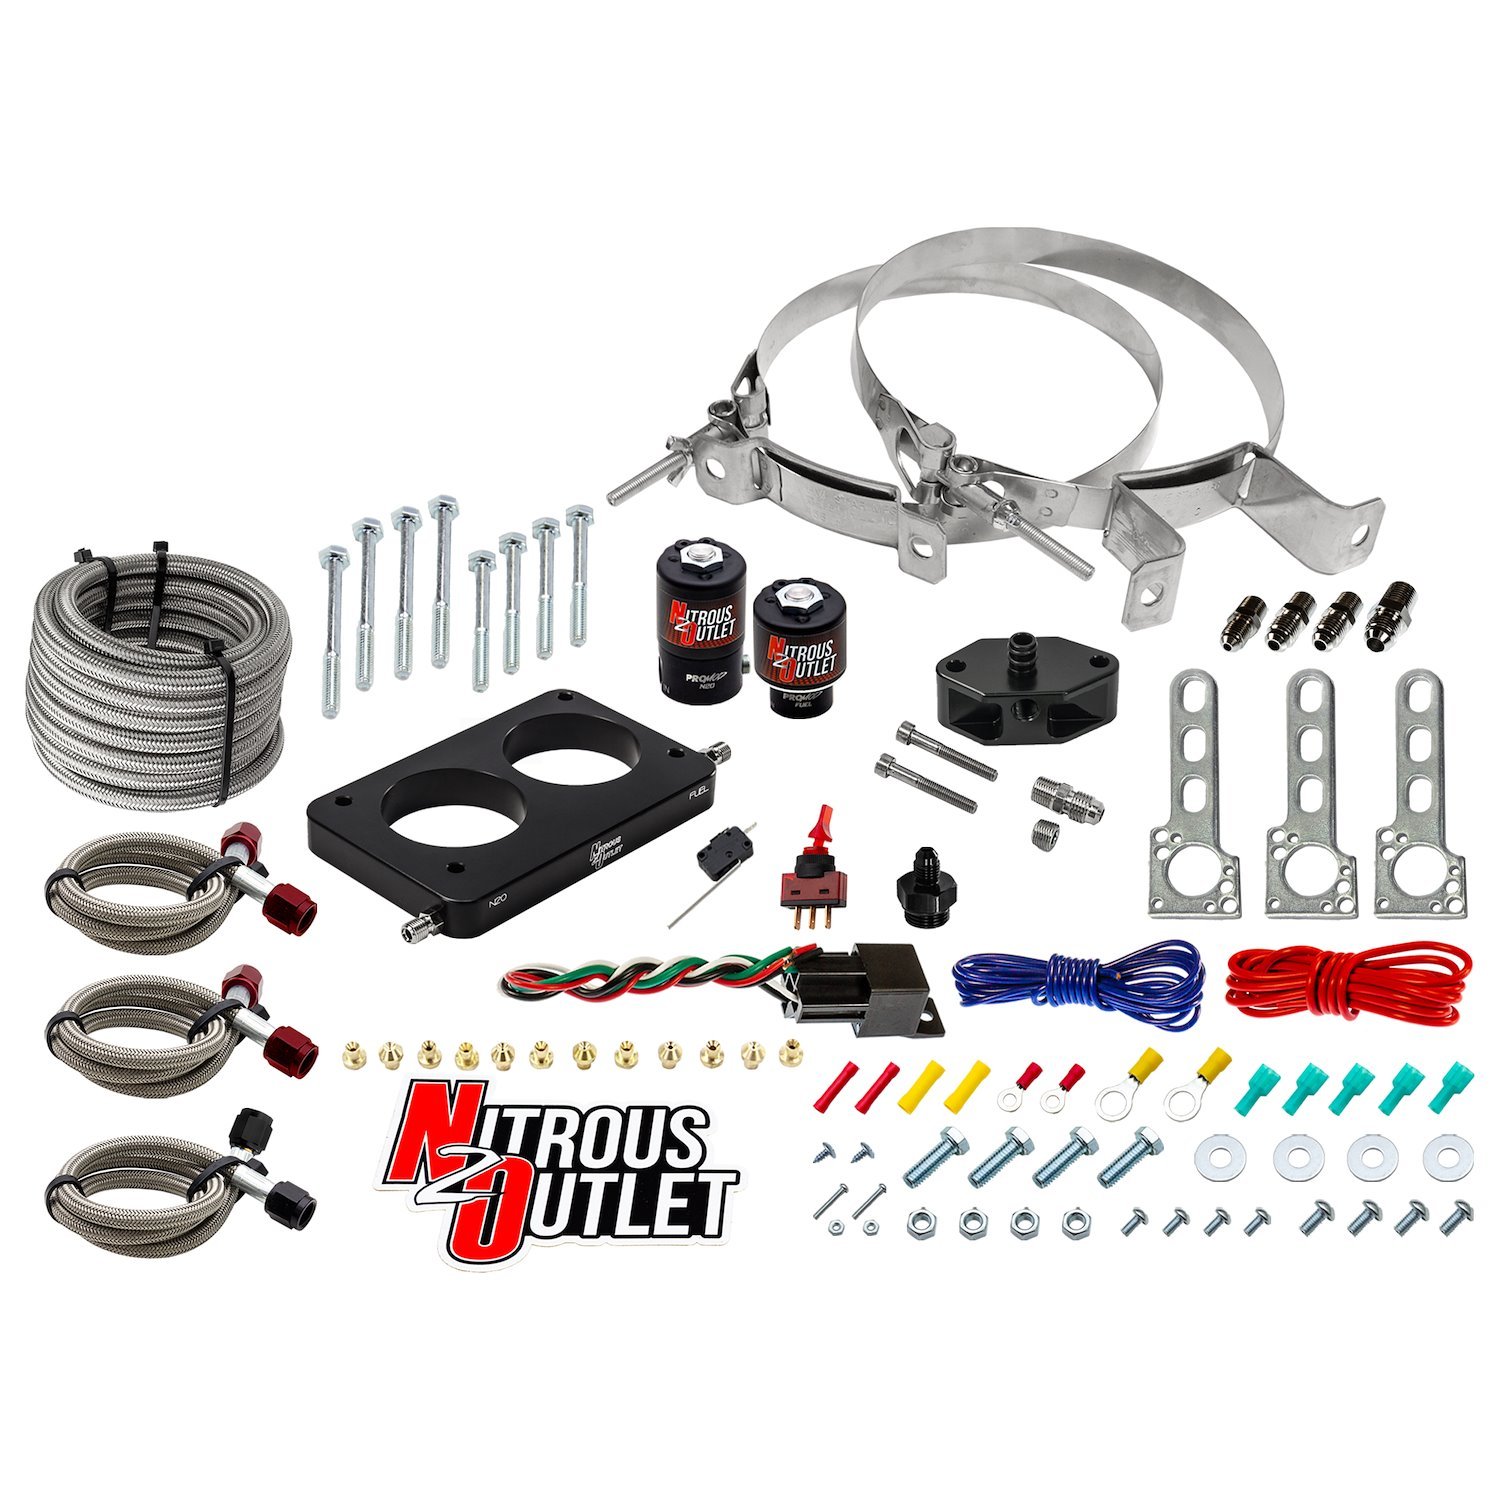 00-10142-00 Ford 2005-2010 4.6L 3V Mustang Plate System, Gas/E85, 5-55psi, 50-200HP, No Bottle